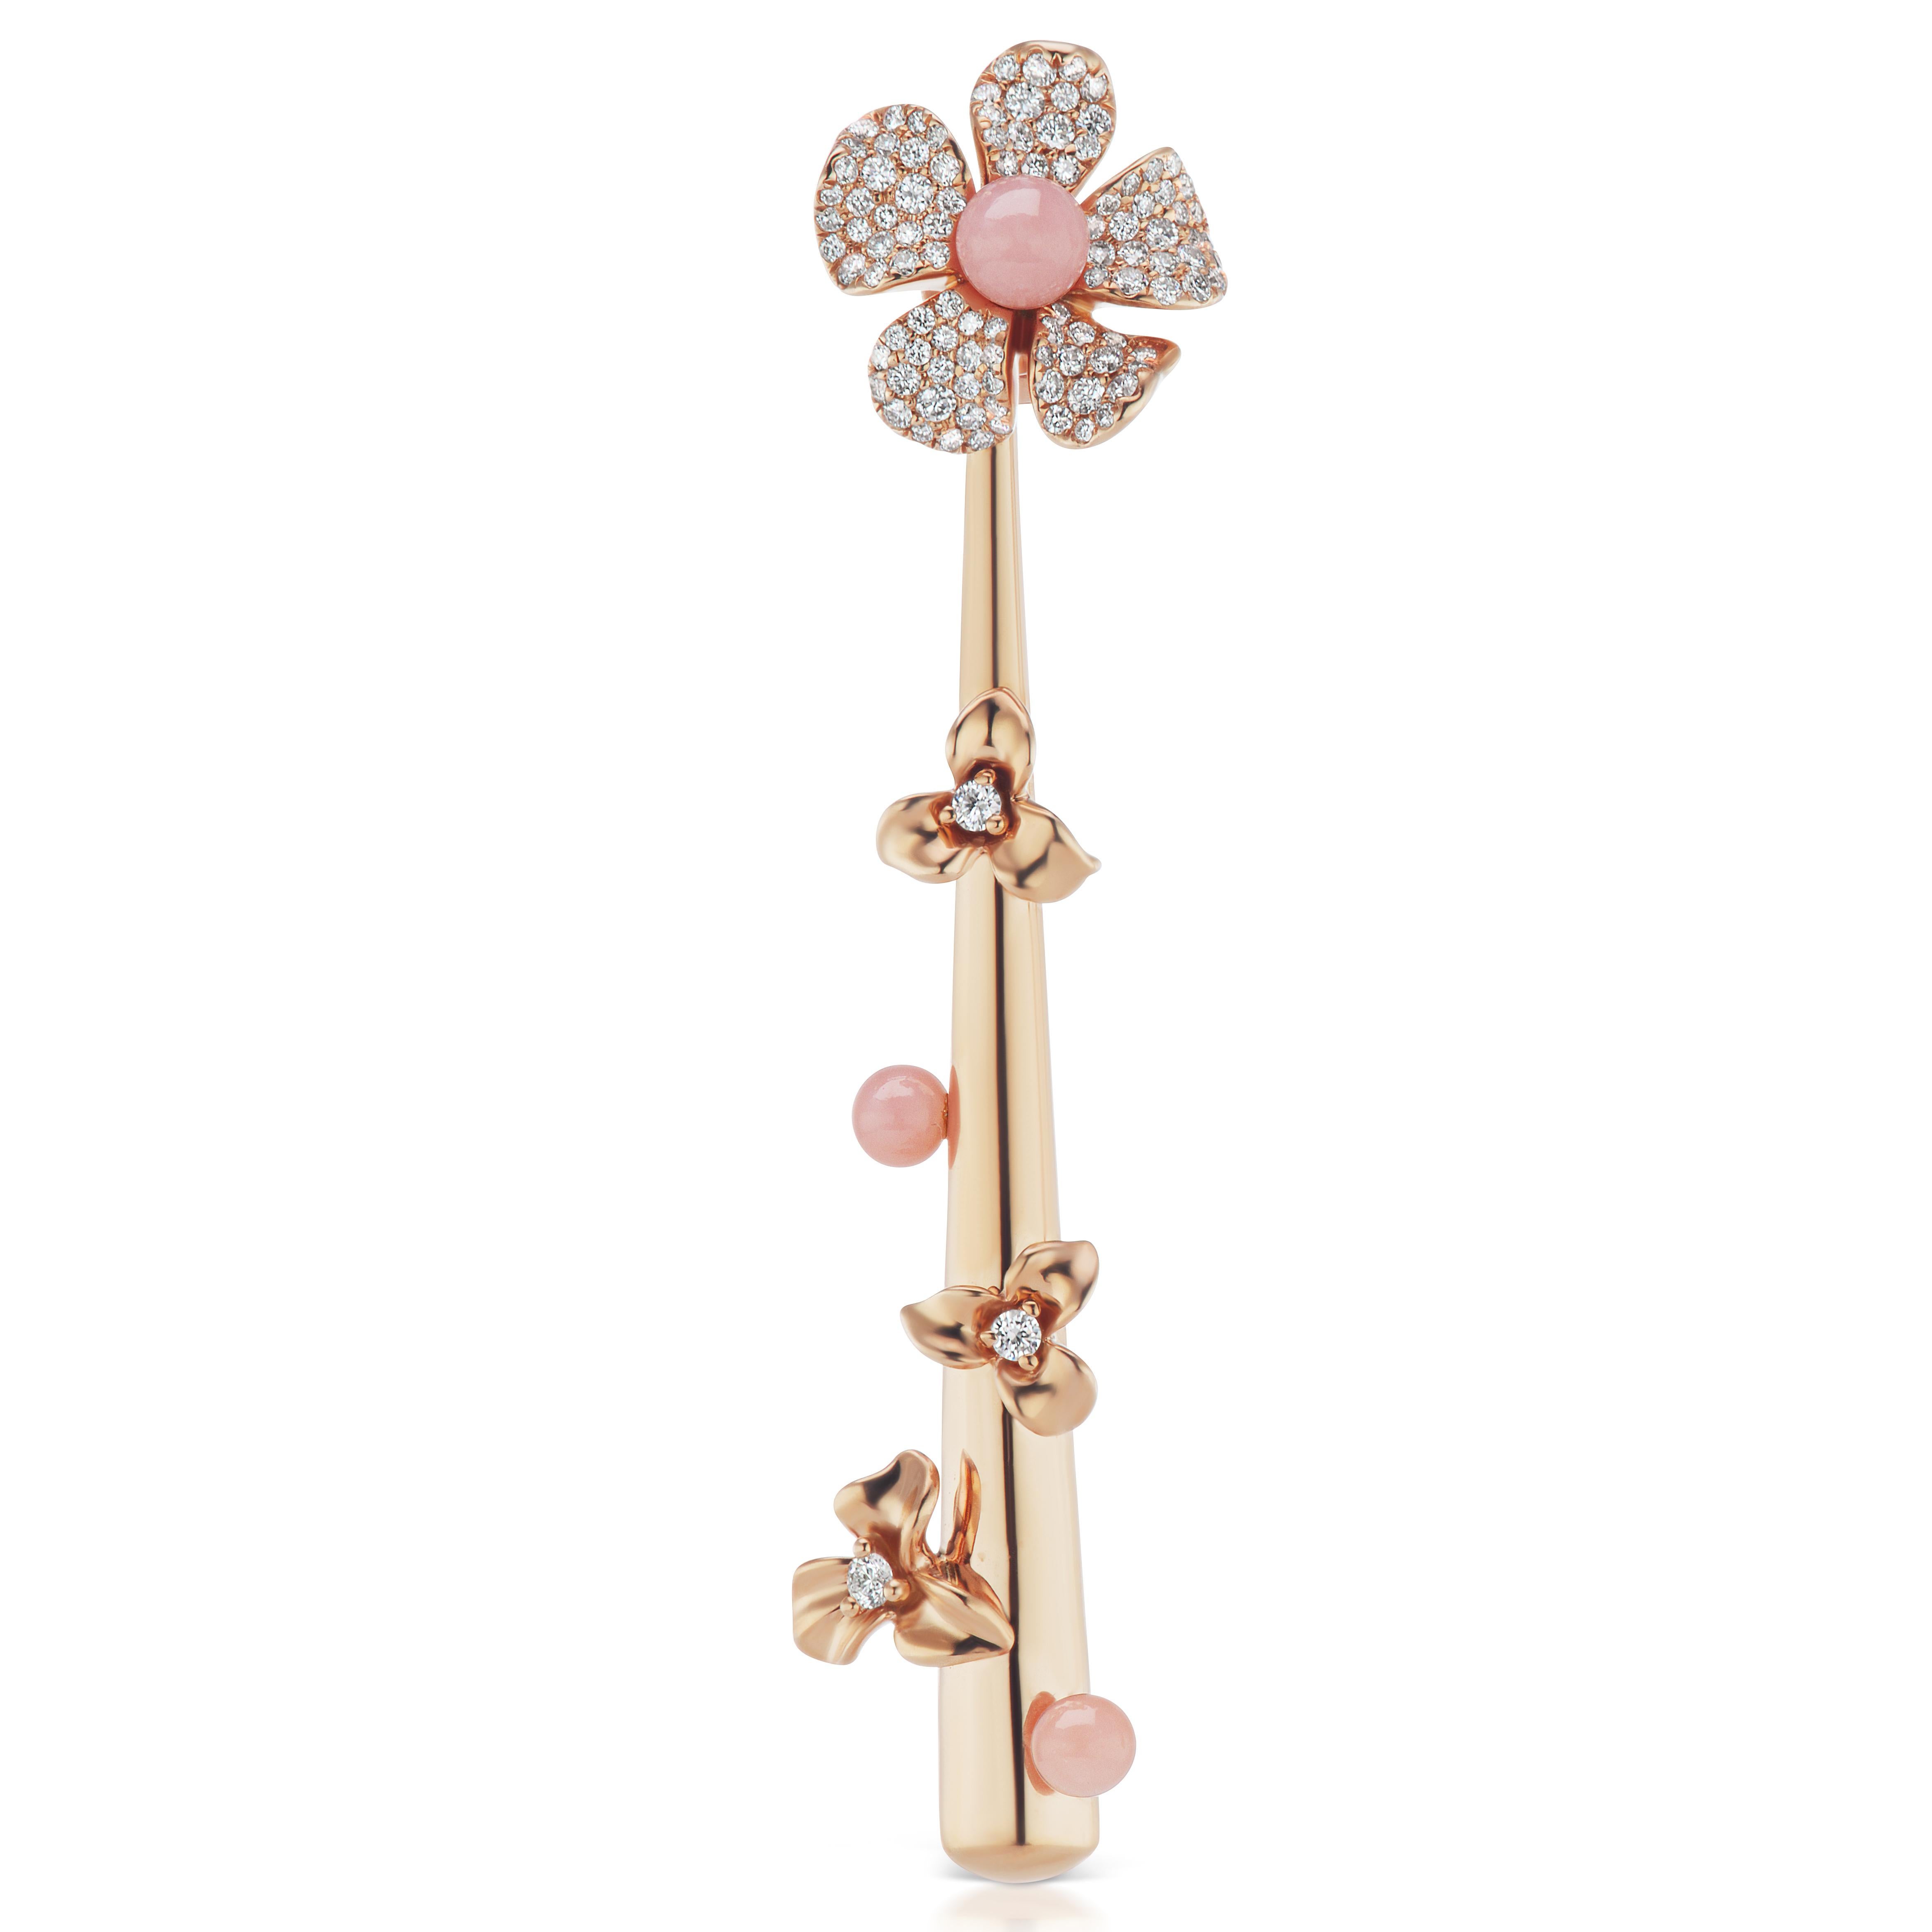 18K Rose Gold Drop Earrings with Diamond and Pink Opal accents.
0.852 diamond tcw.
Diamond Quality G VS1.
1.75